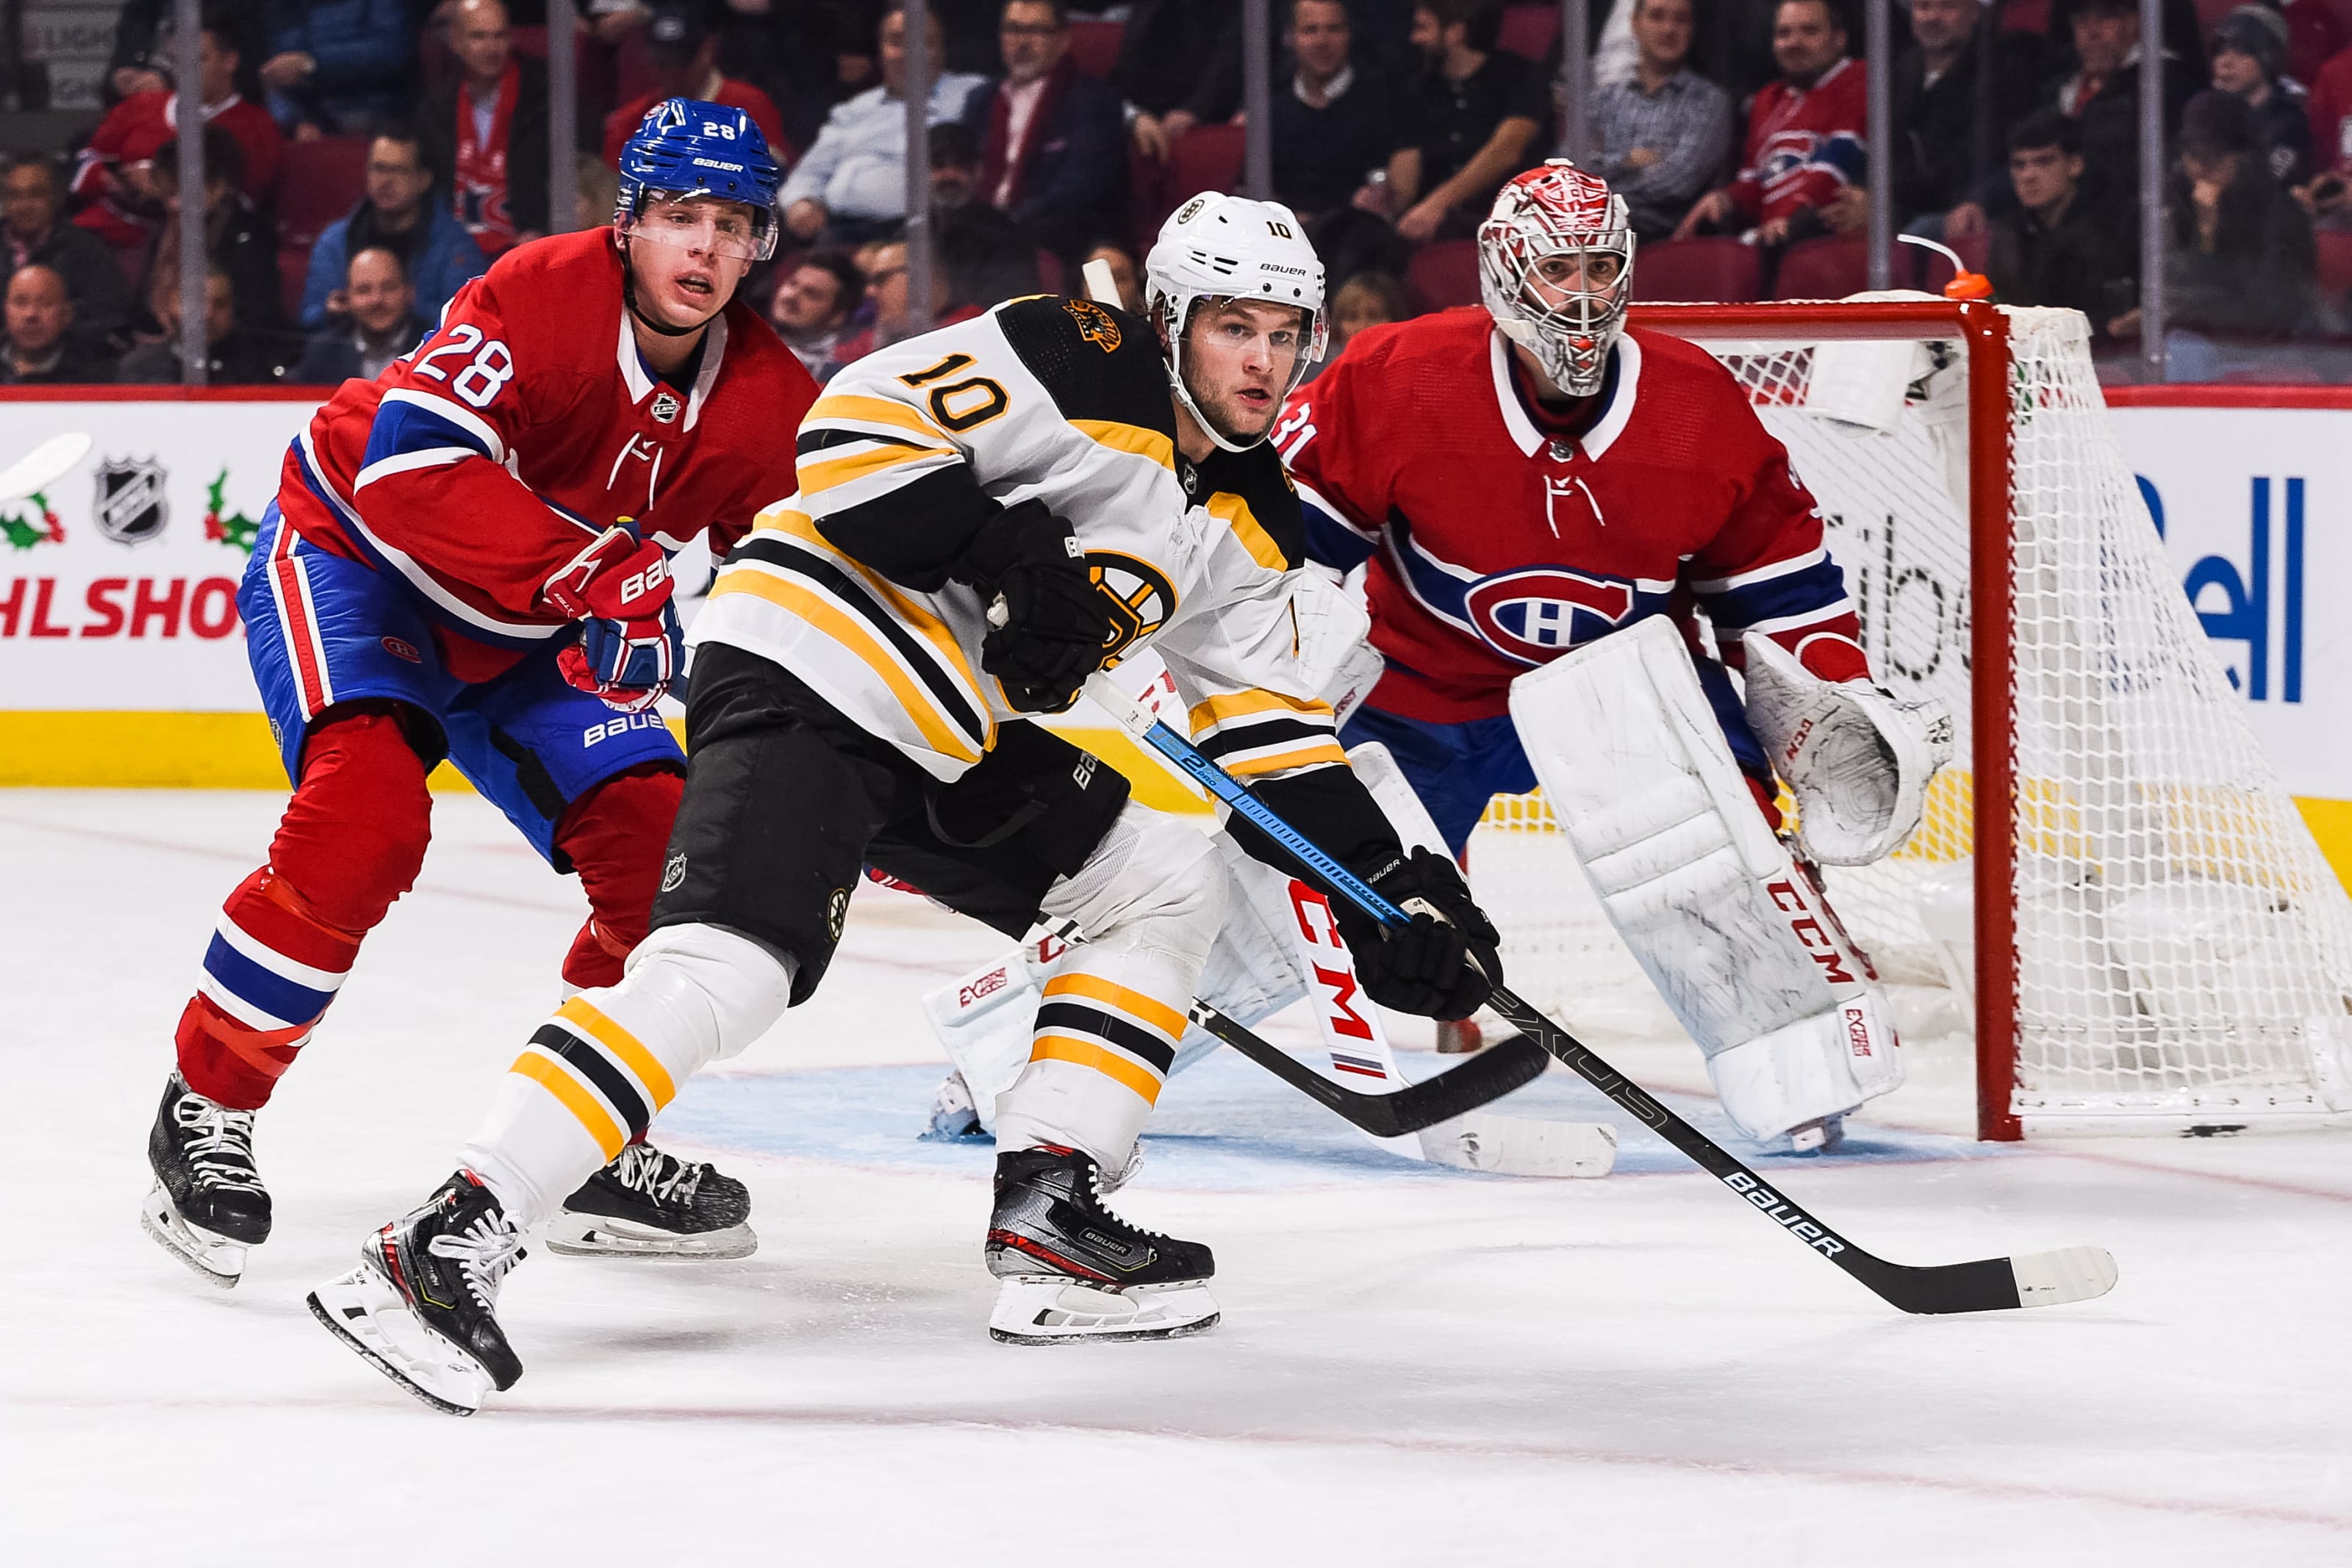 Boston Bruins: Should We Expect More Offensive Fireworks Against Montreal?